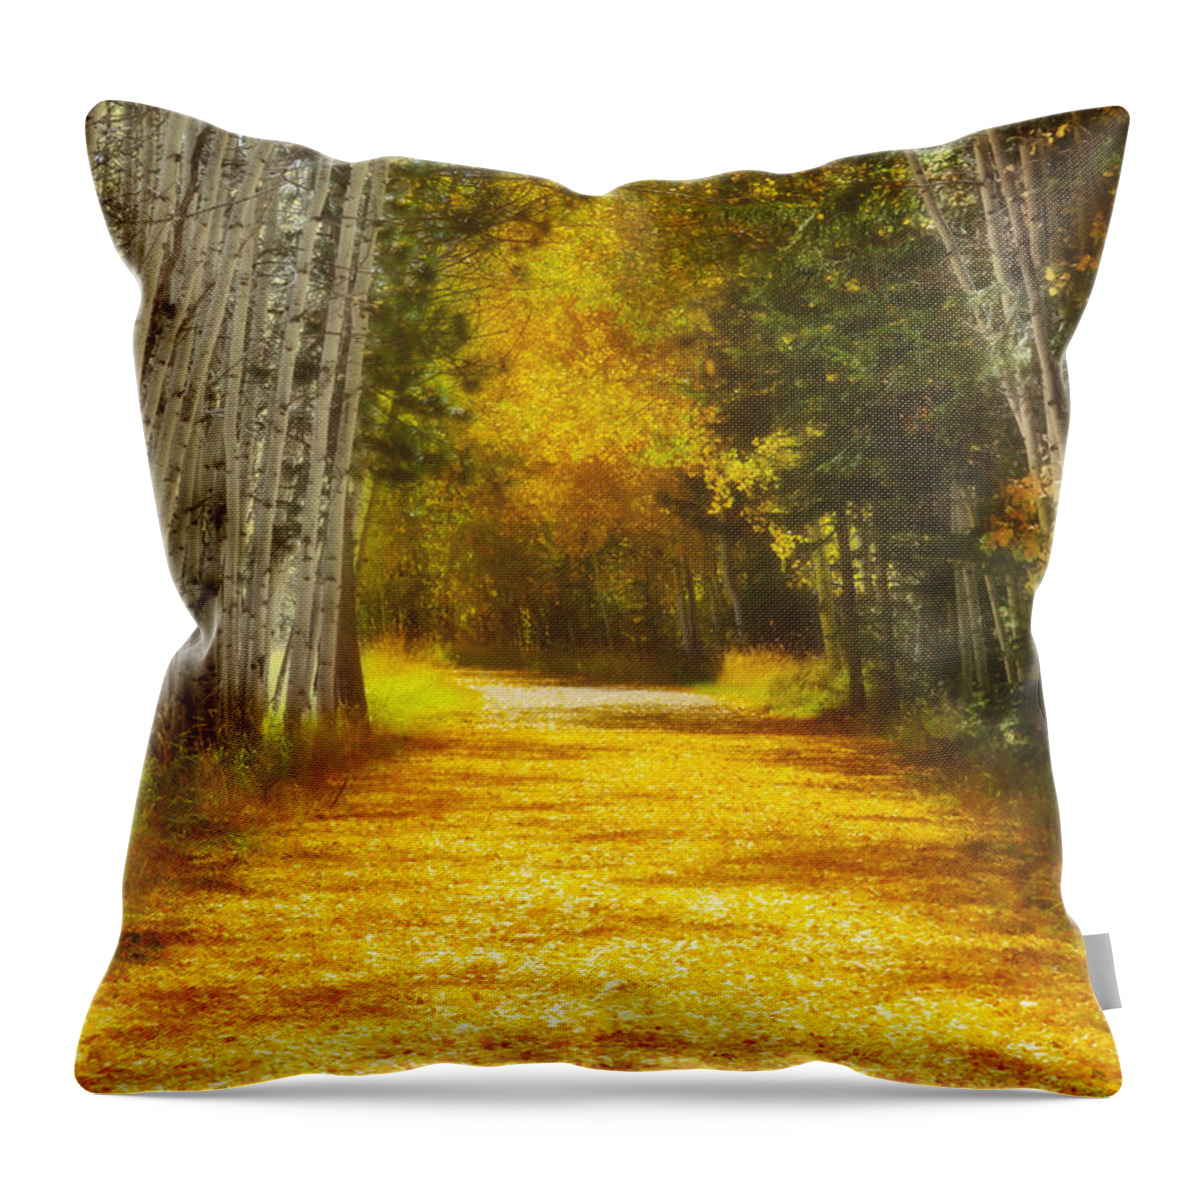 Aspens Throw Pillow featuring the photograph Say You'll Follow Me by Amanda Smith